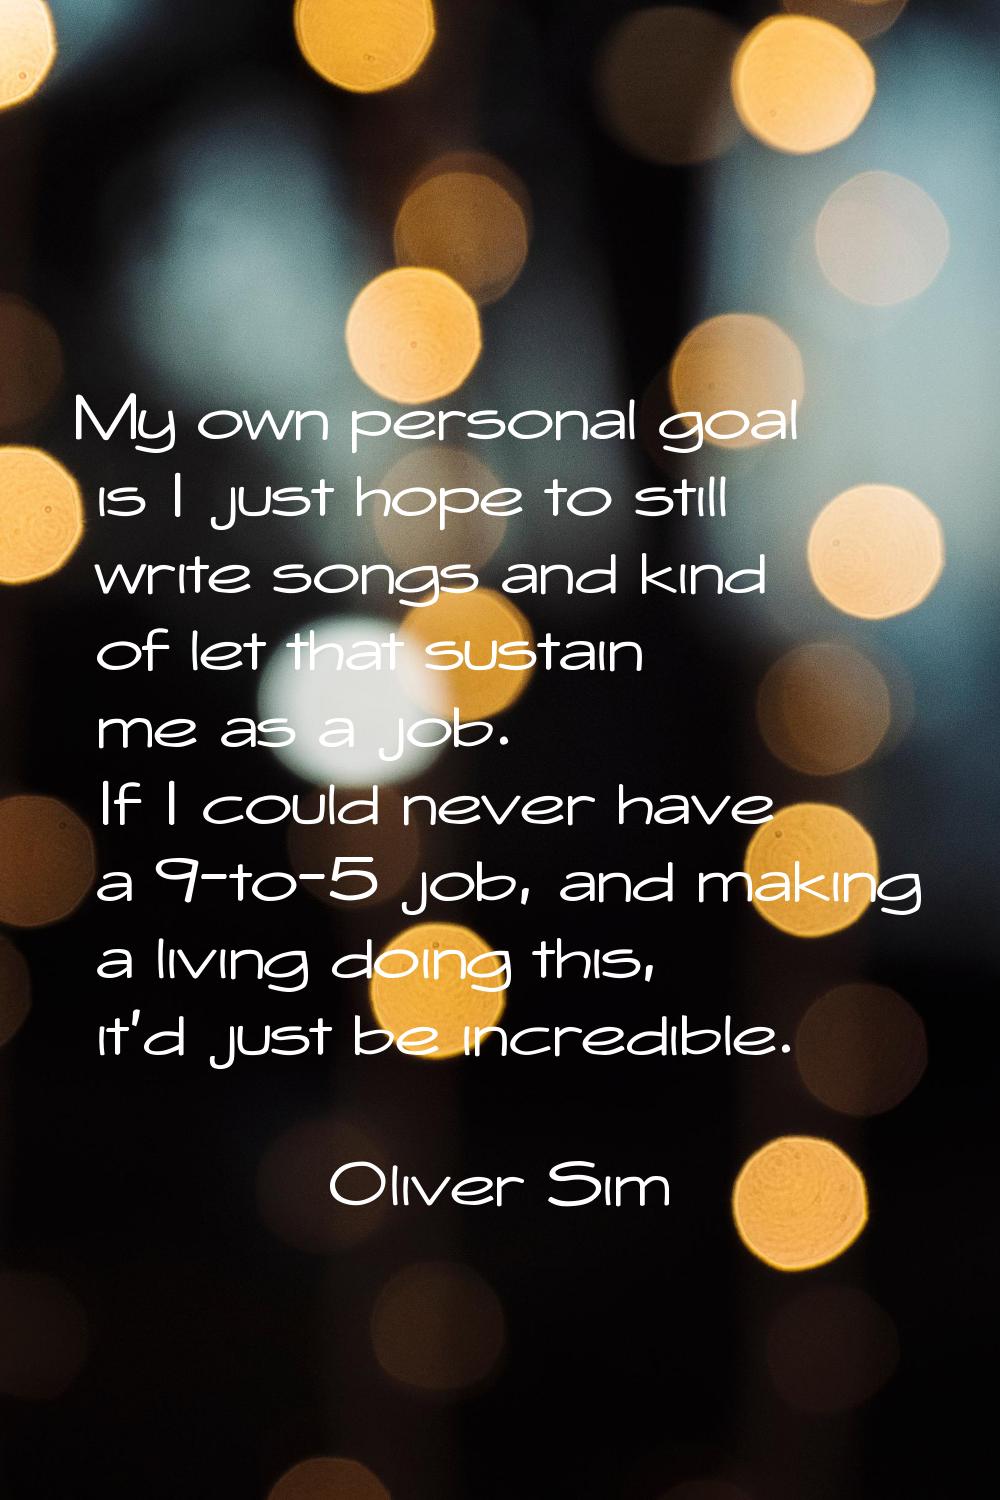 My own personal goal is I just hope to still write songs and kind of let that sustain me as a job. 